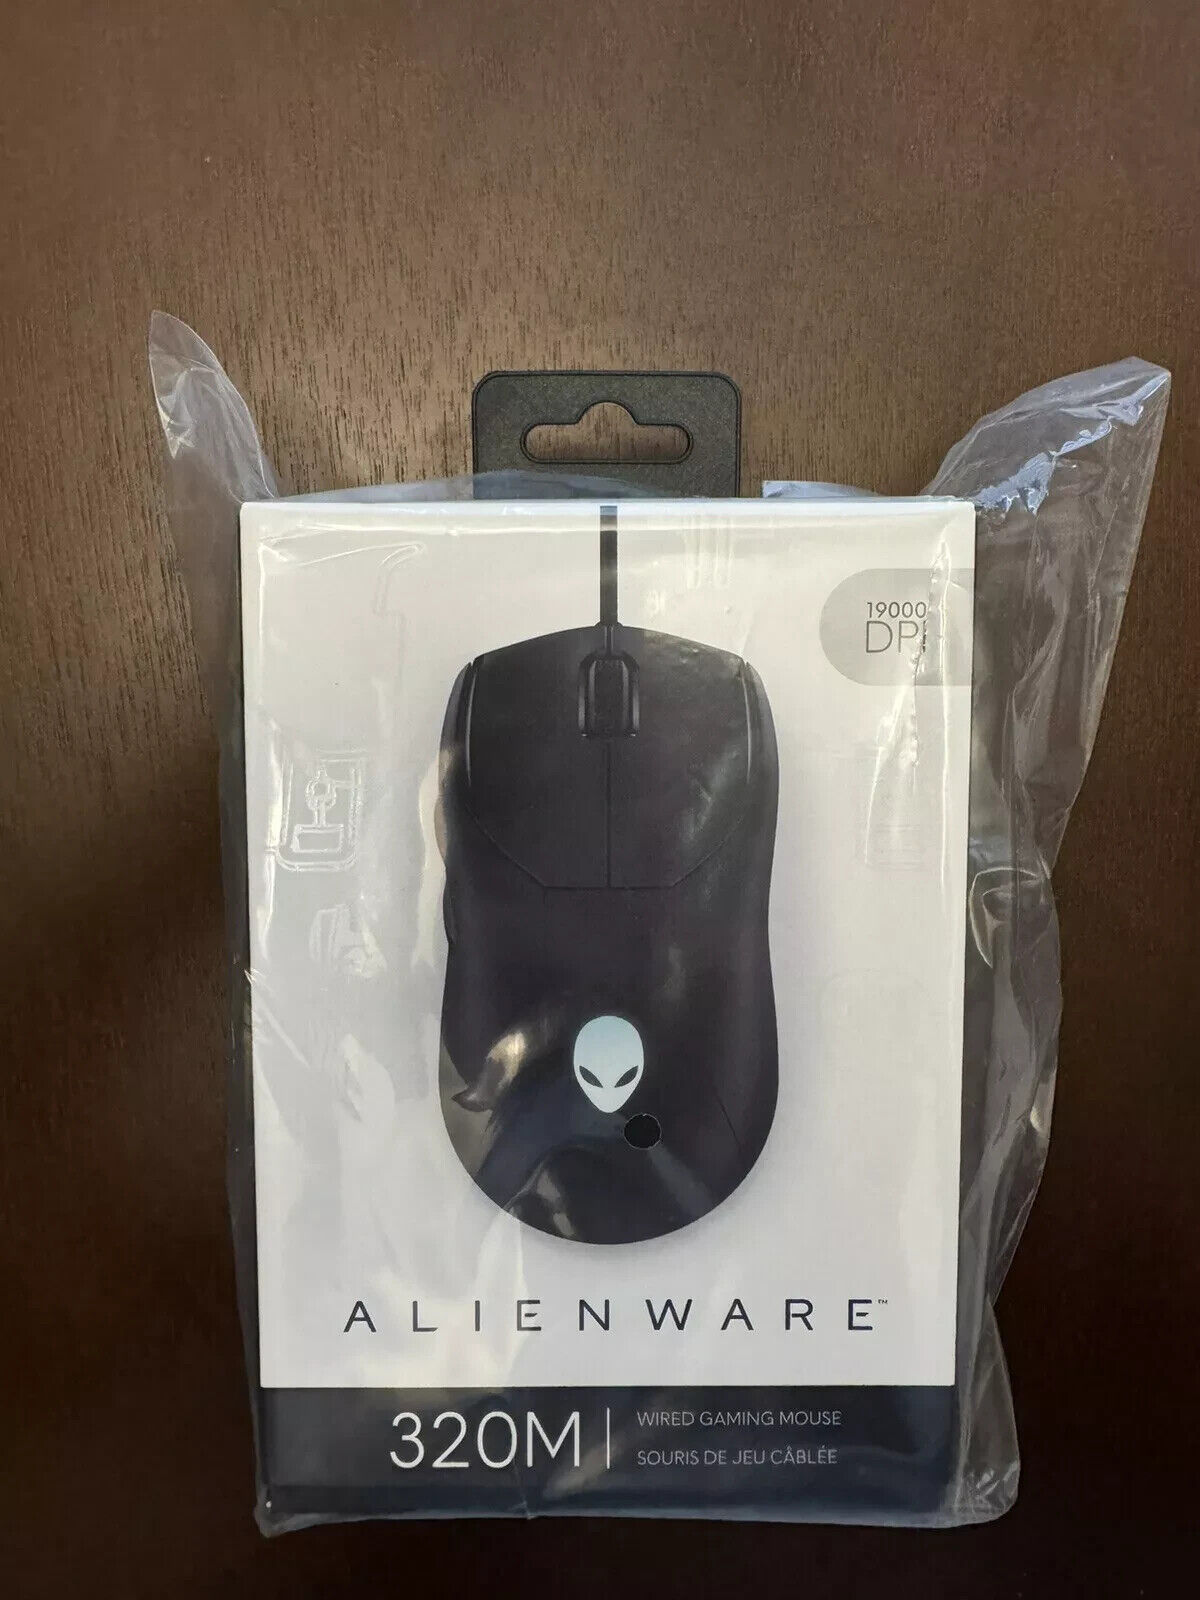 Alienware AW320M Wired Gaming Mouse - Brand New/Sealed, Ships Same Day